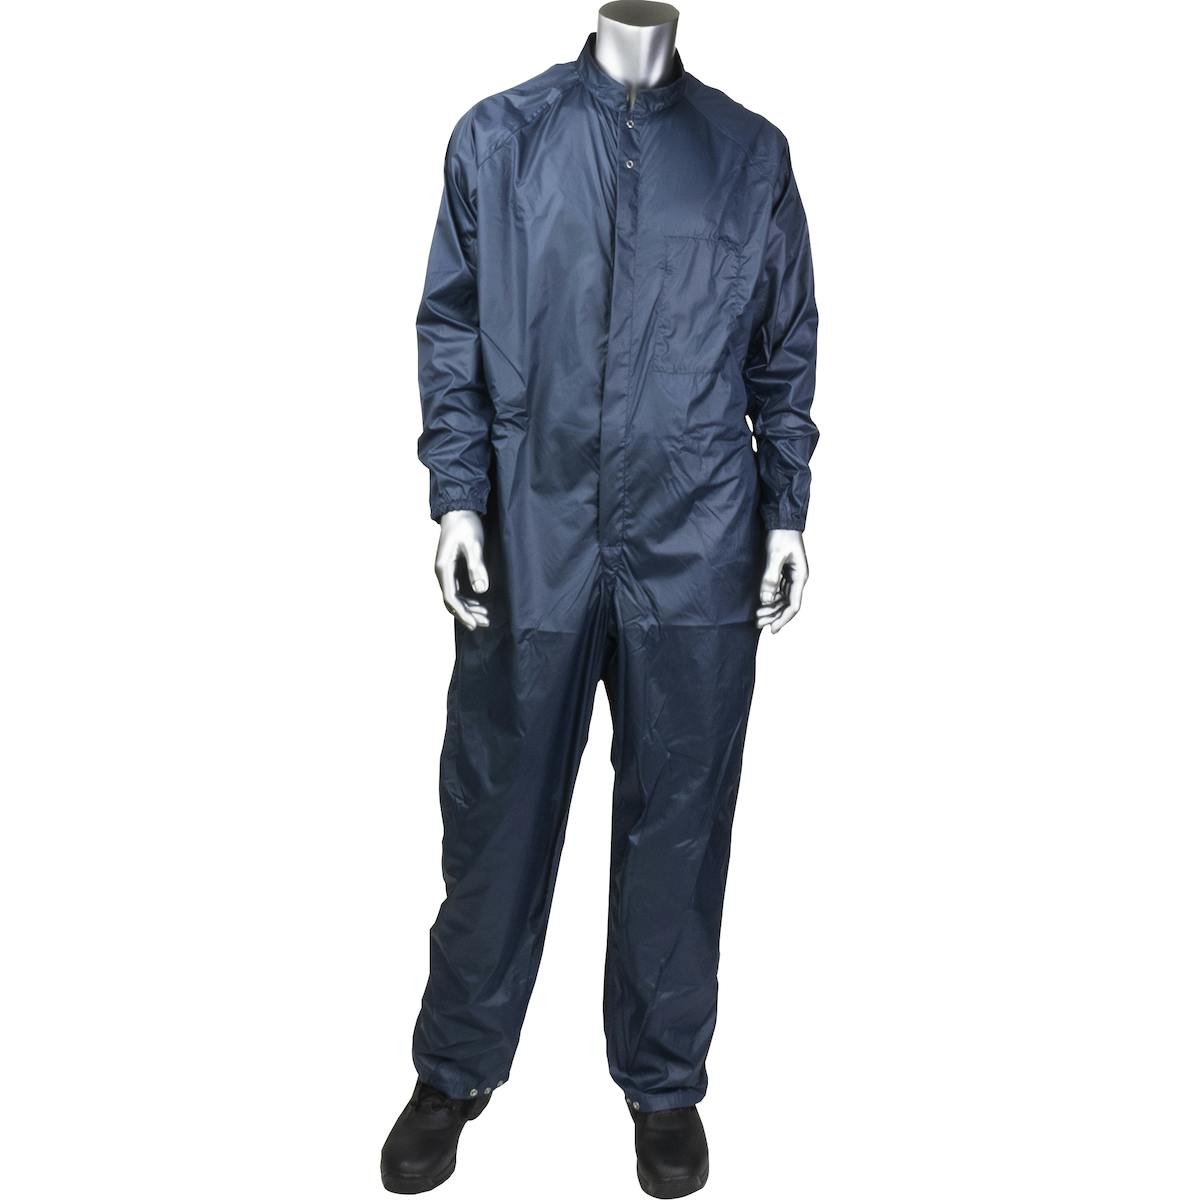 Spray Barrier Paint / Powder Coating Coverall, Navy (CCNQ8-26NV)